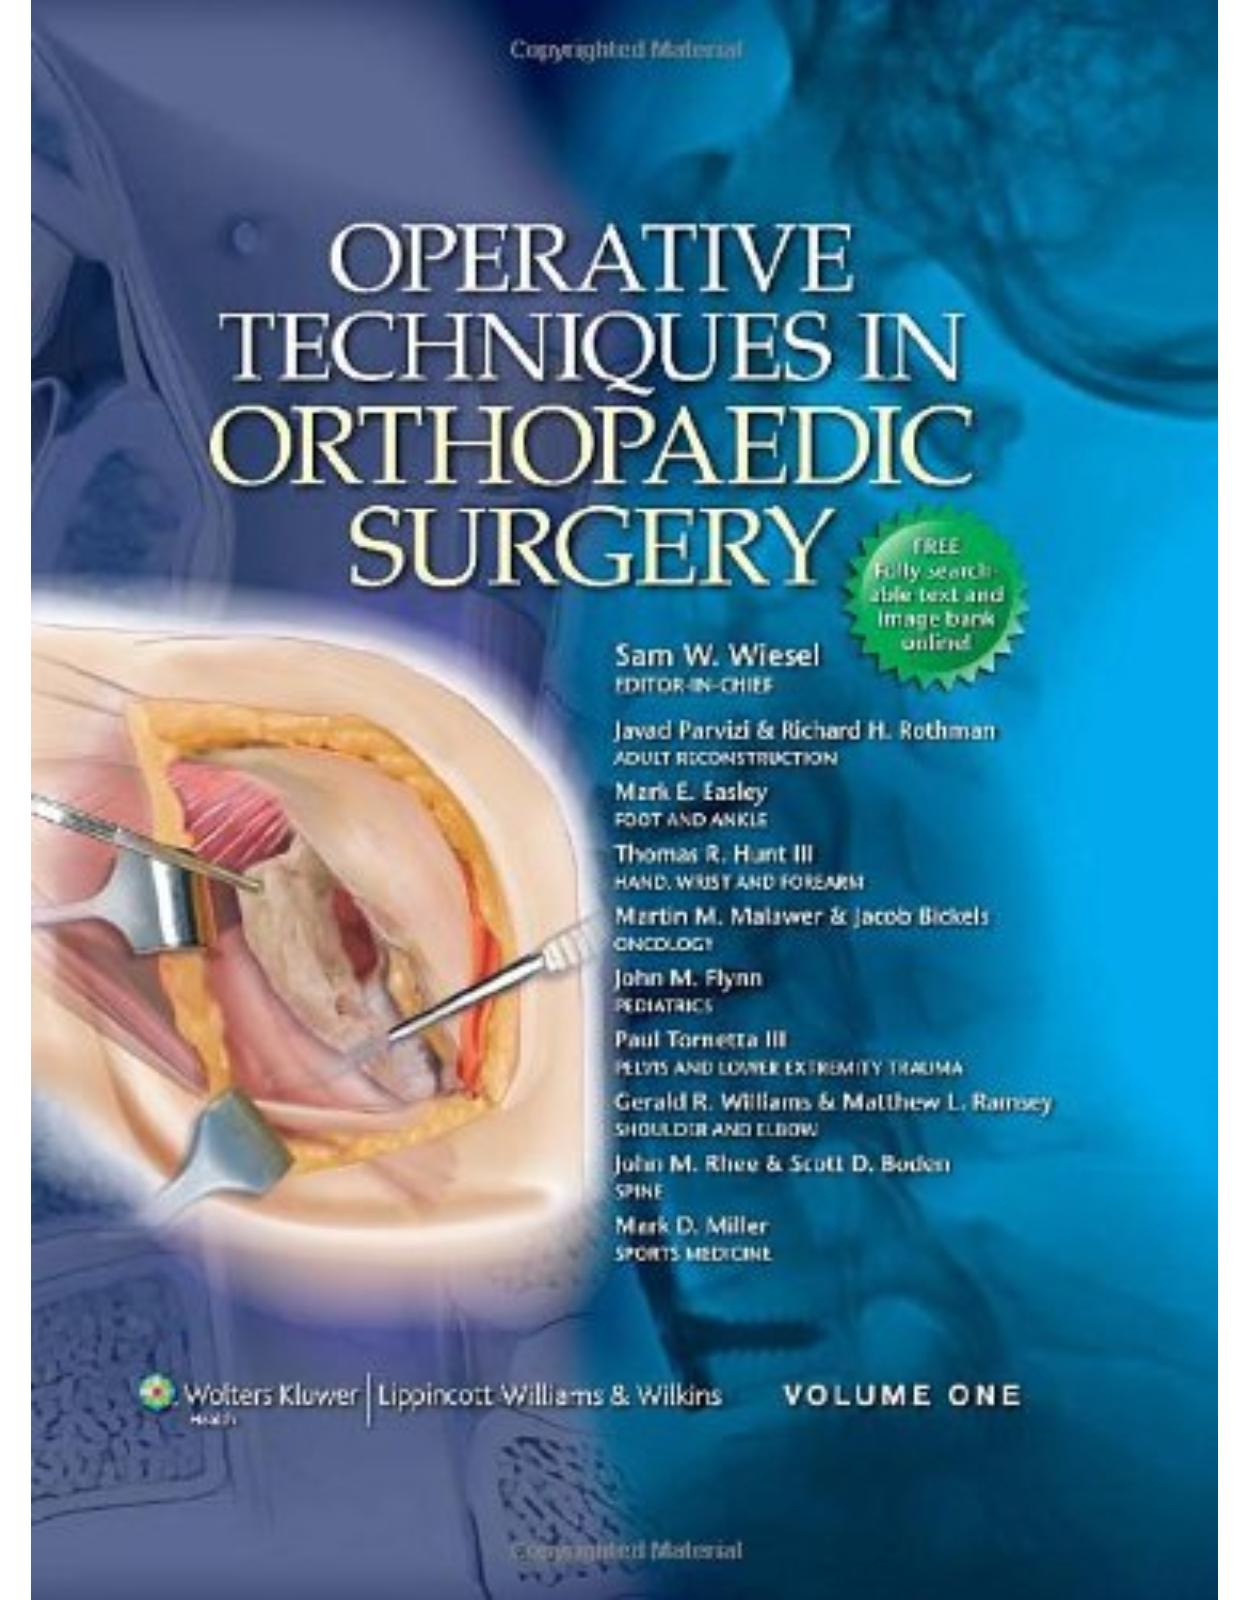 Operative Techniques in Orthopaedic Surgery (4 Volume Set)